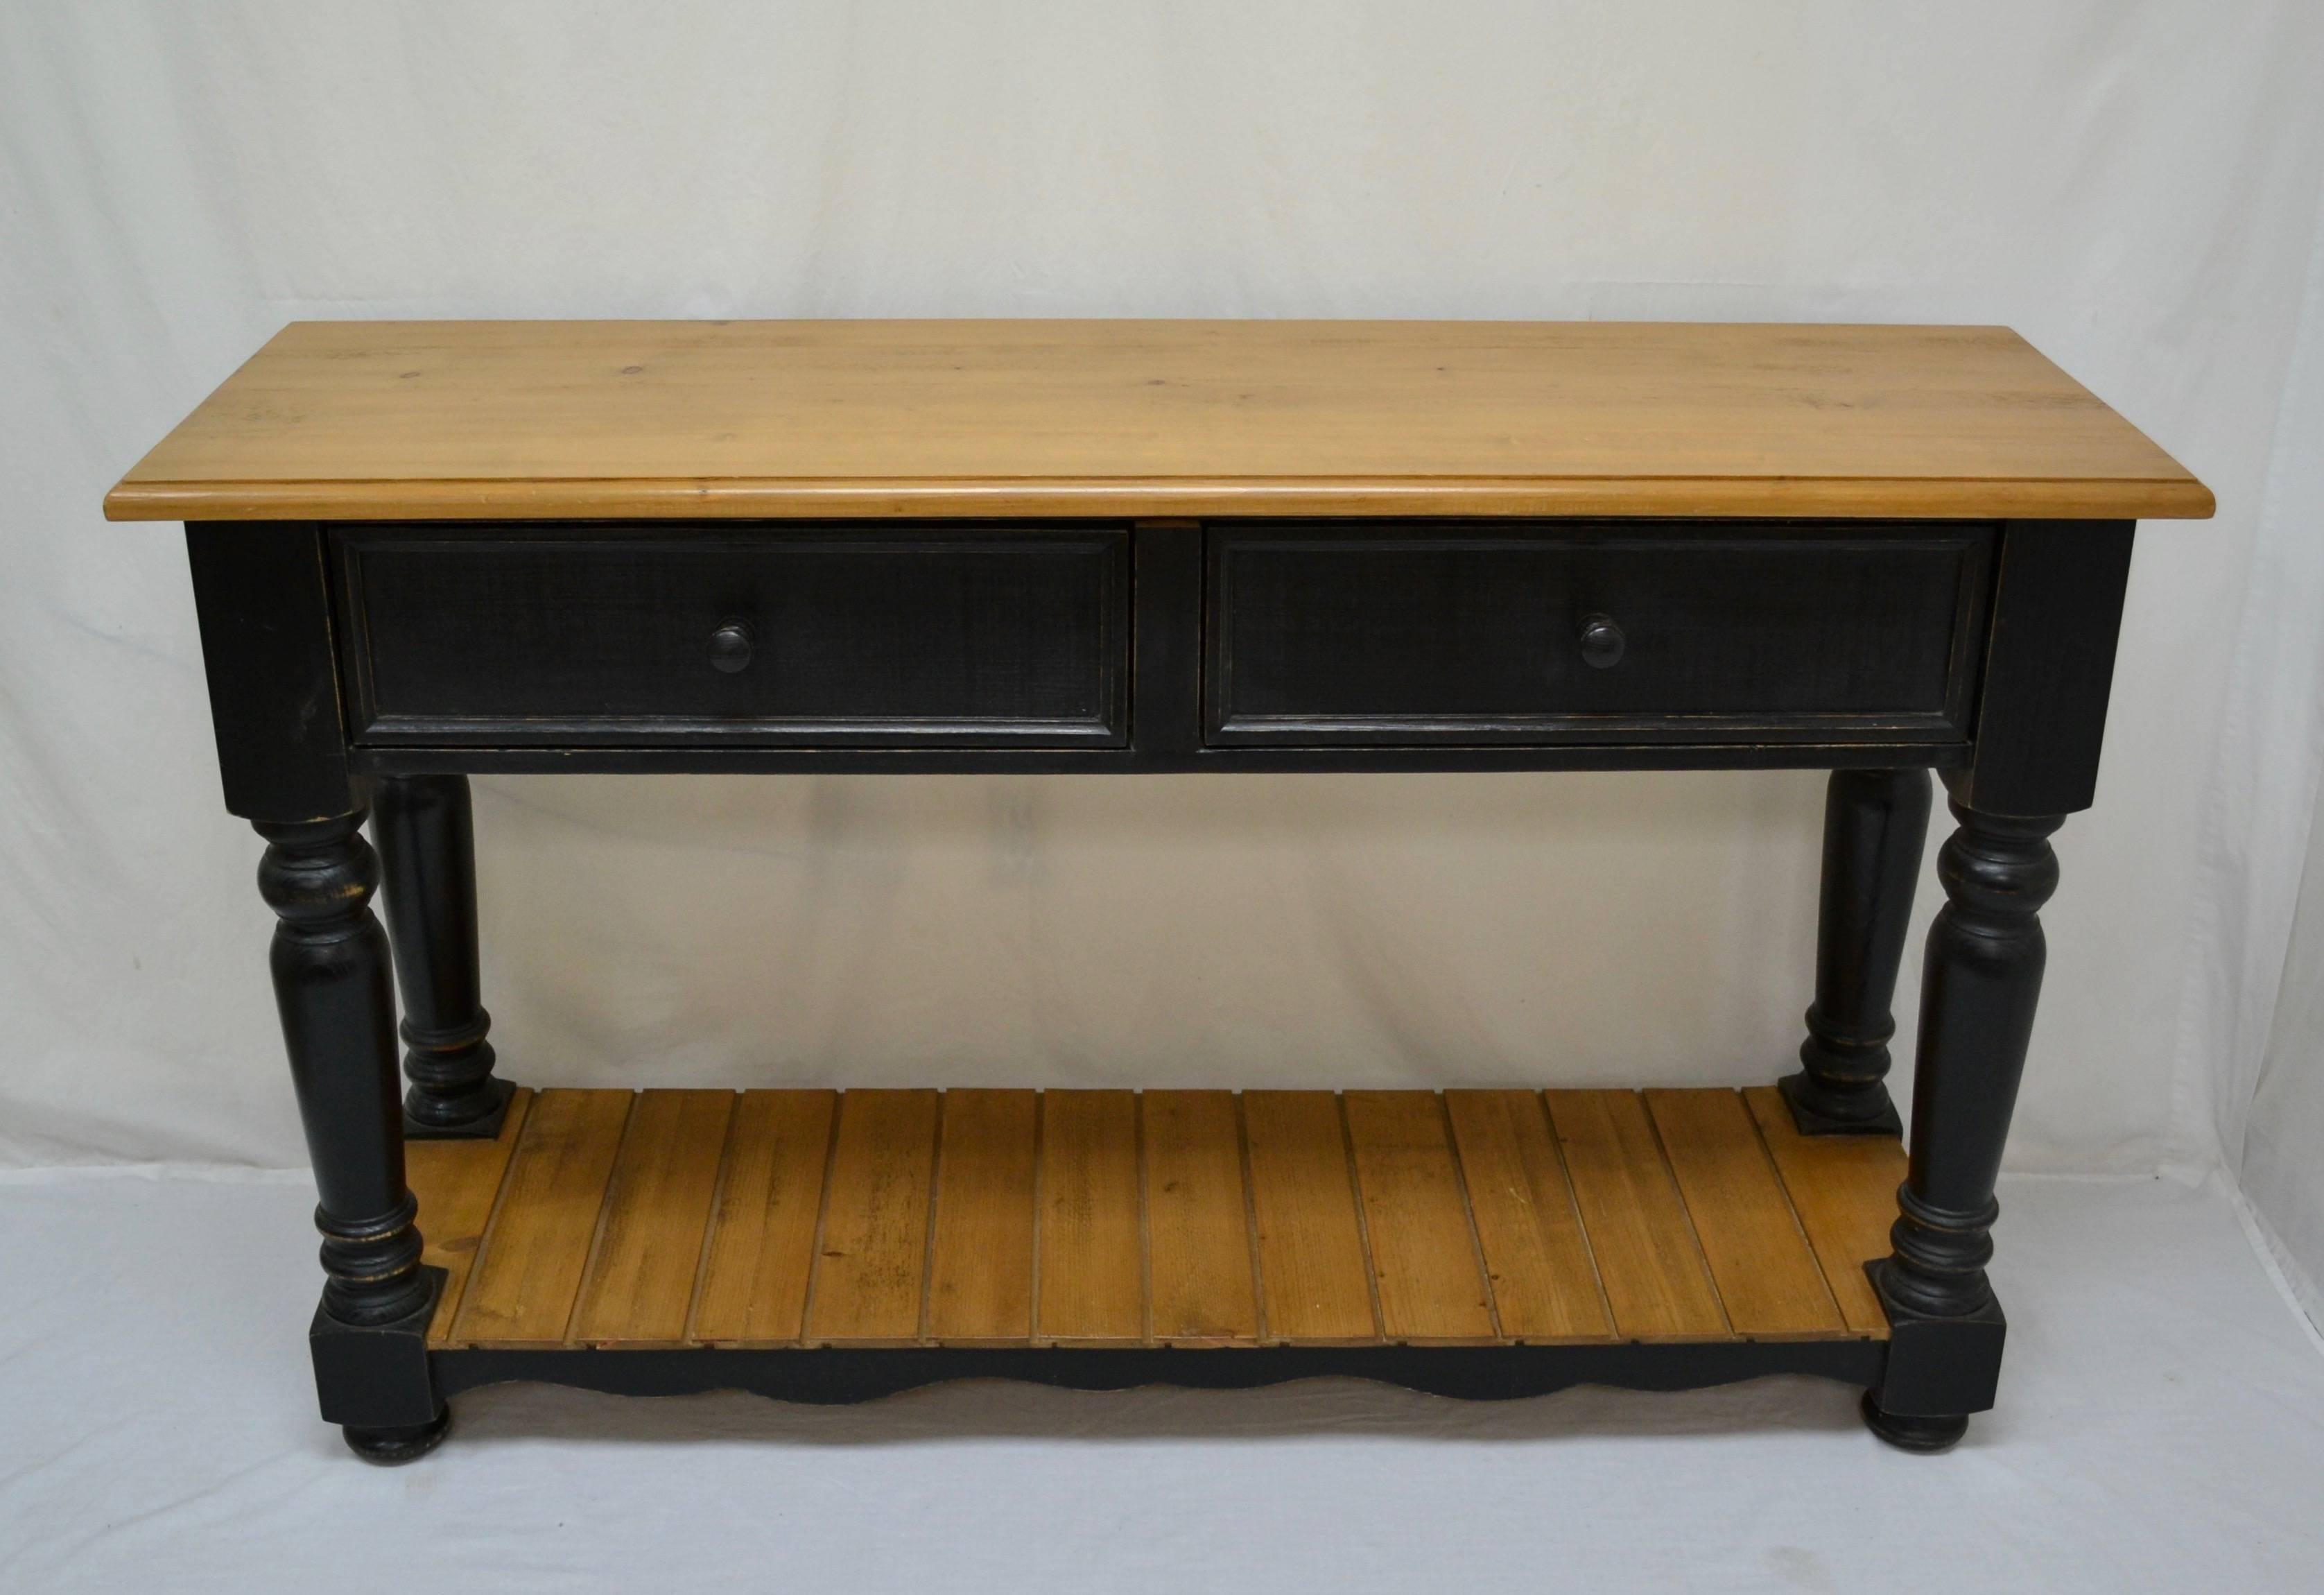 This is a handsome and distinguished English Jacobean style server with two deep dovetailed drawers set in a straight apron.  Four boldly turned legs and scalloped bottom rails support a sturdy tongue and groove potboard shelf.  This piece is great